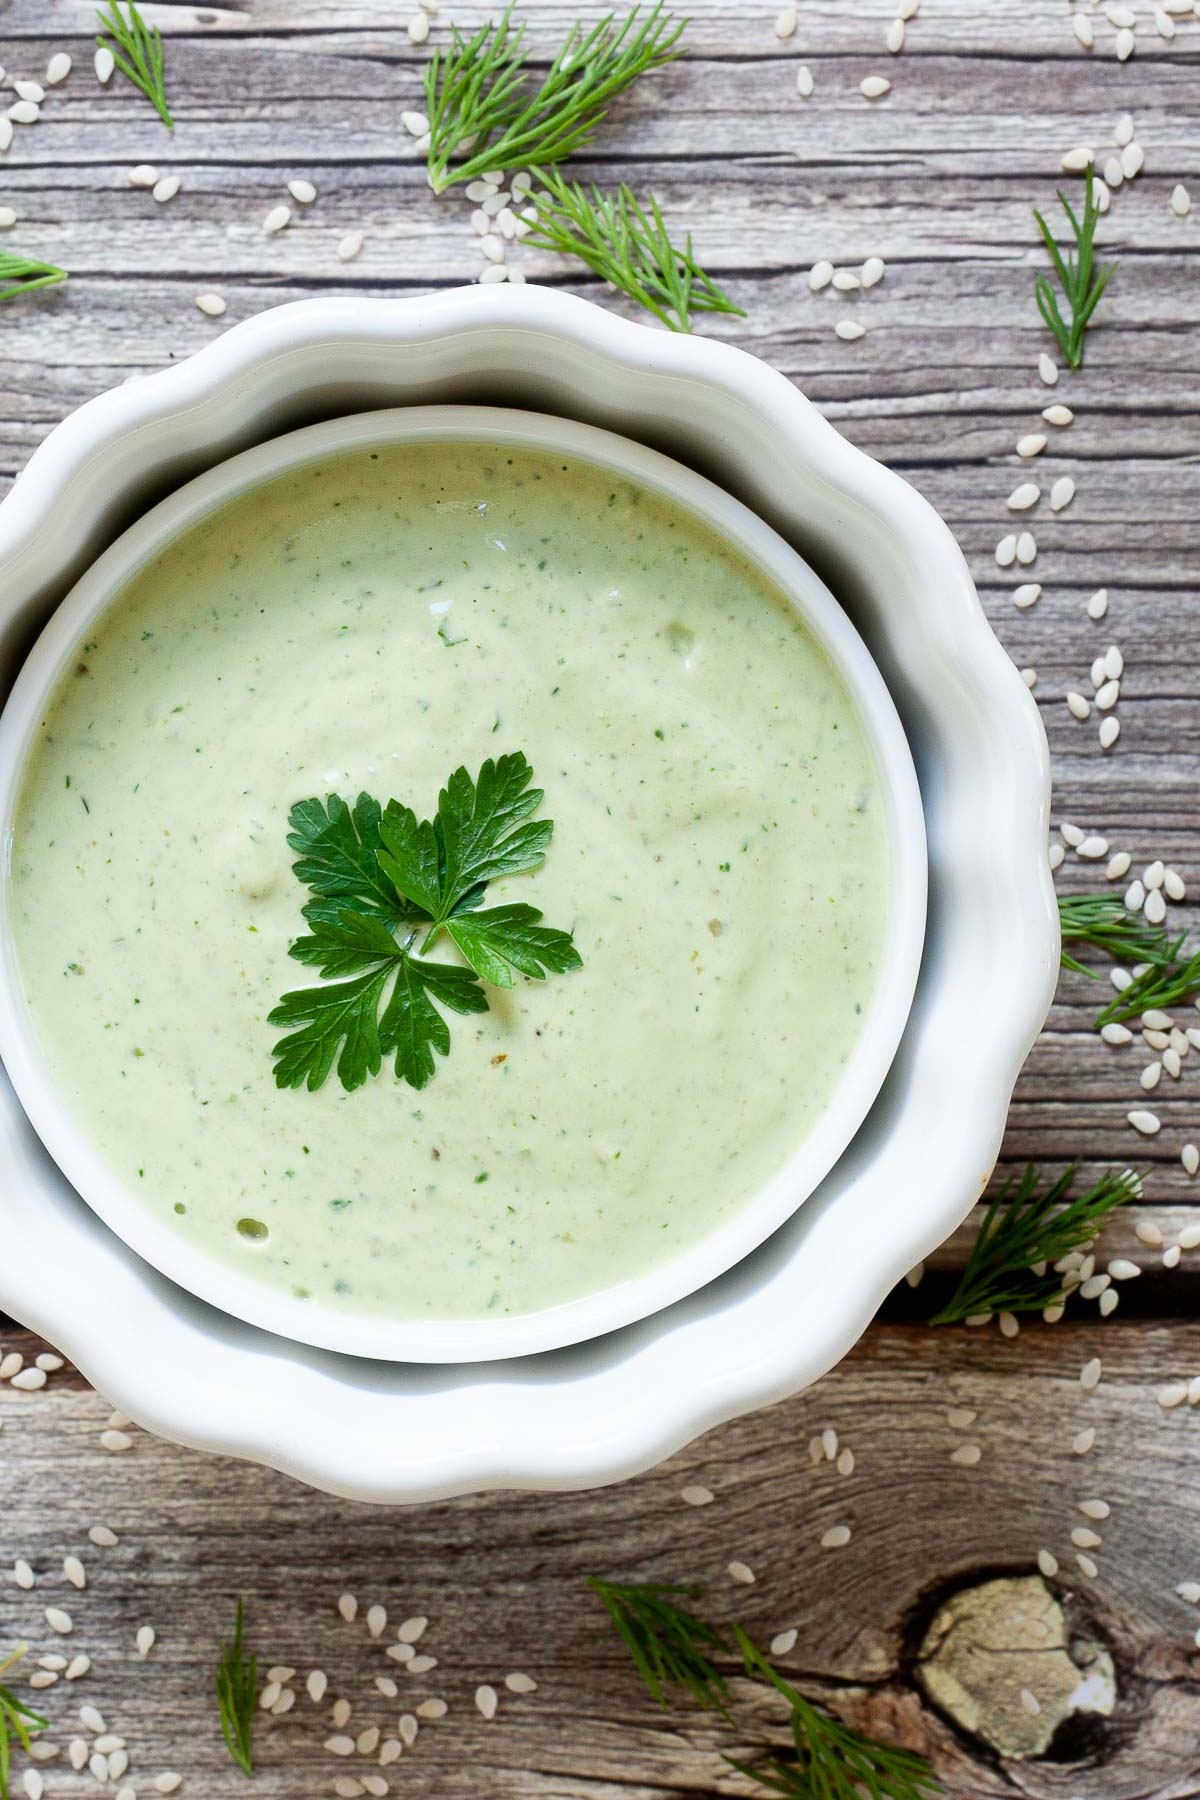 Light green sauce in a white bowl decorated with parsley and dill